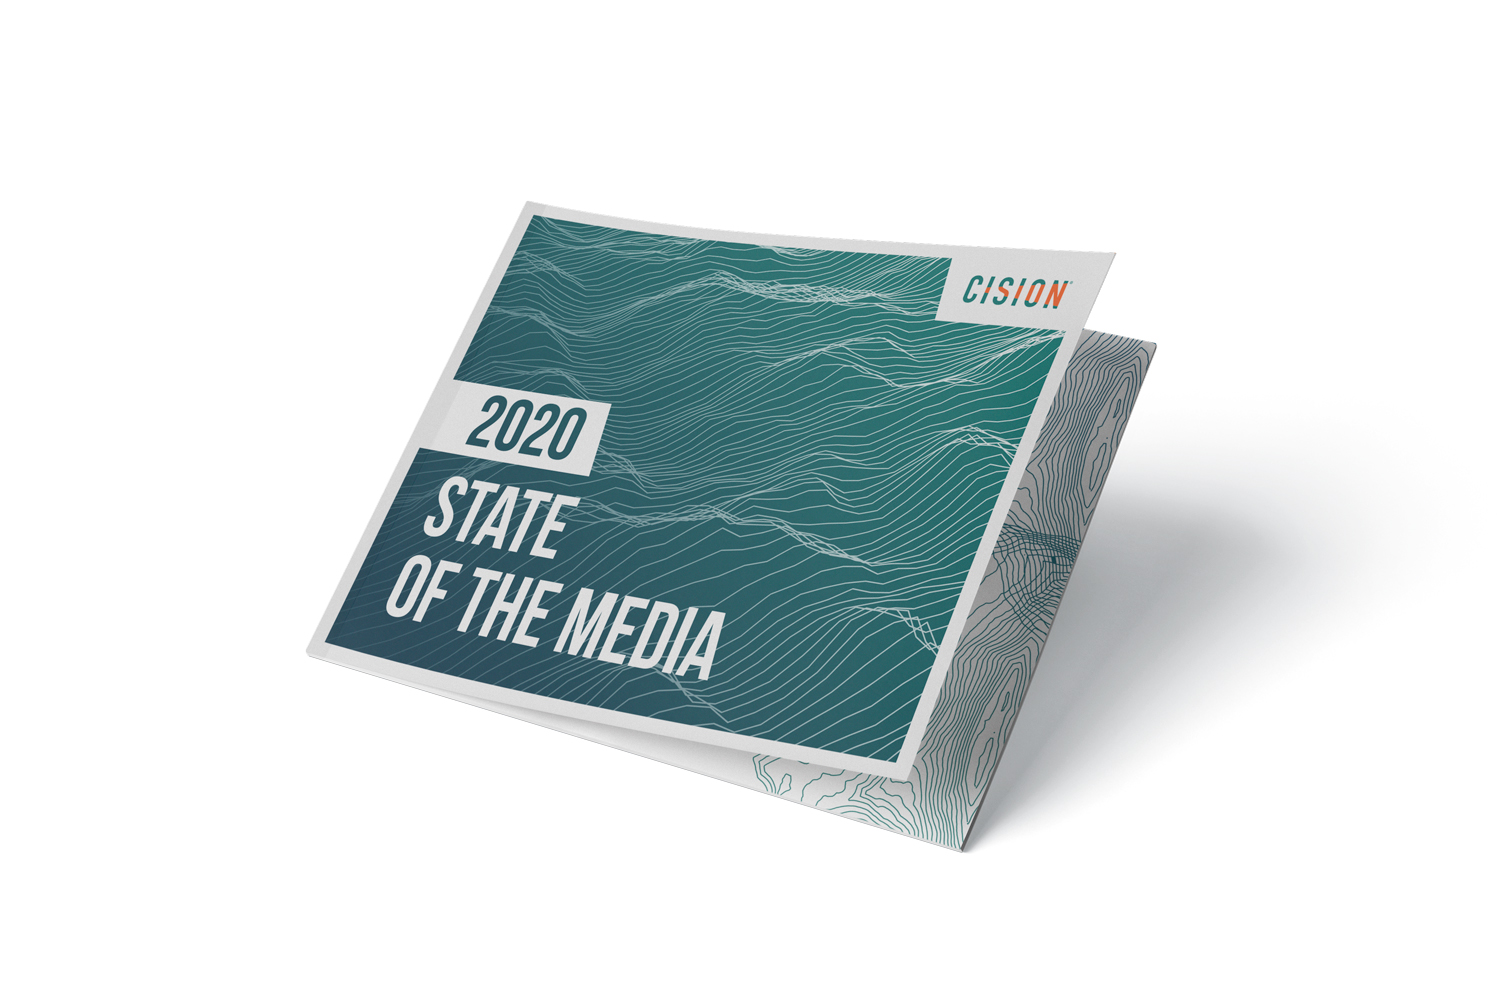 Cision's 2020 Global State of the Media Report  